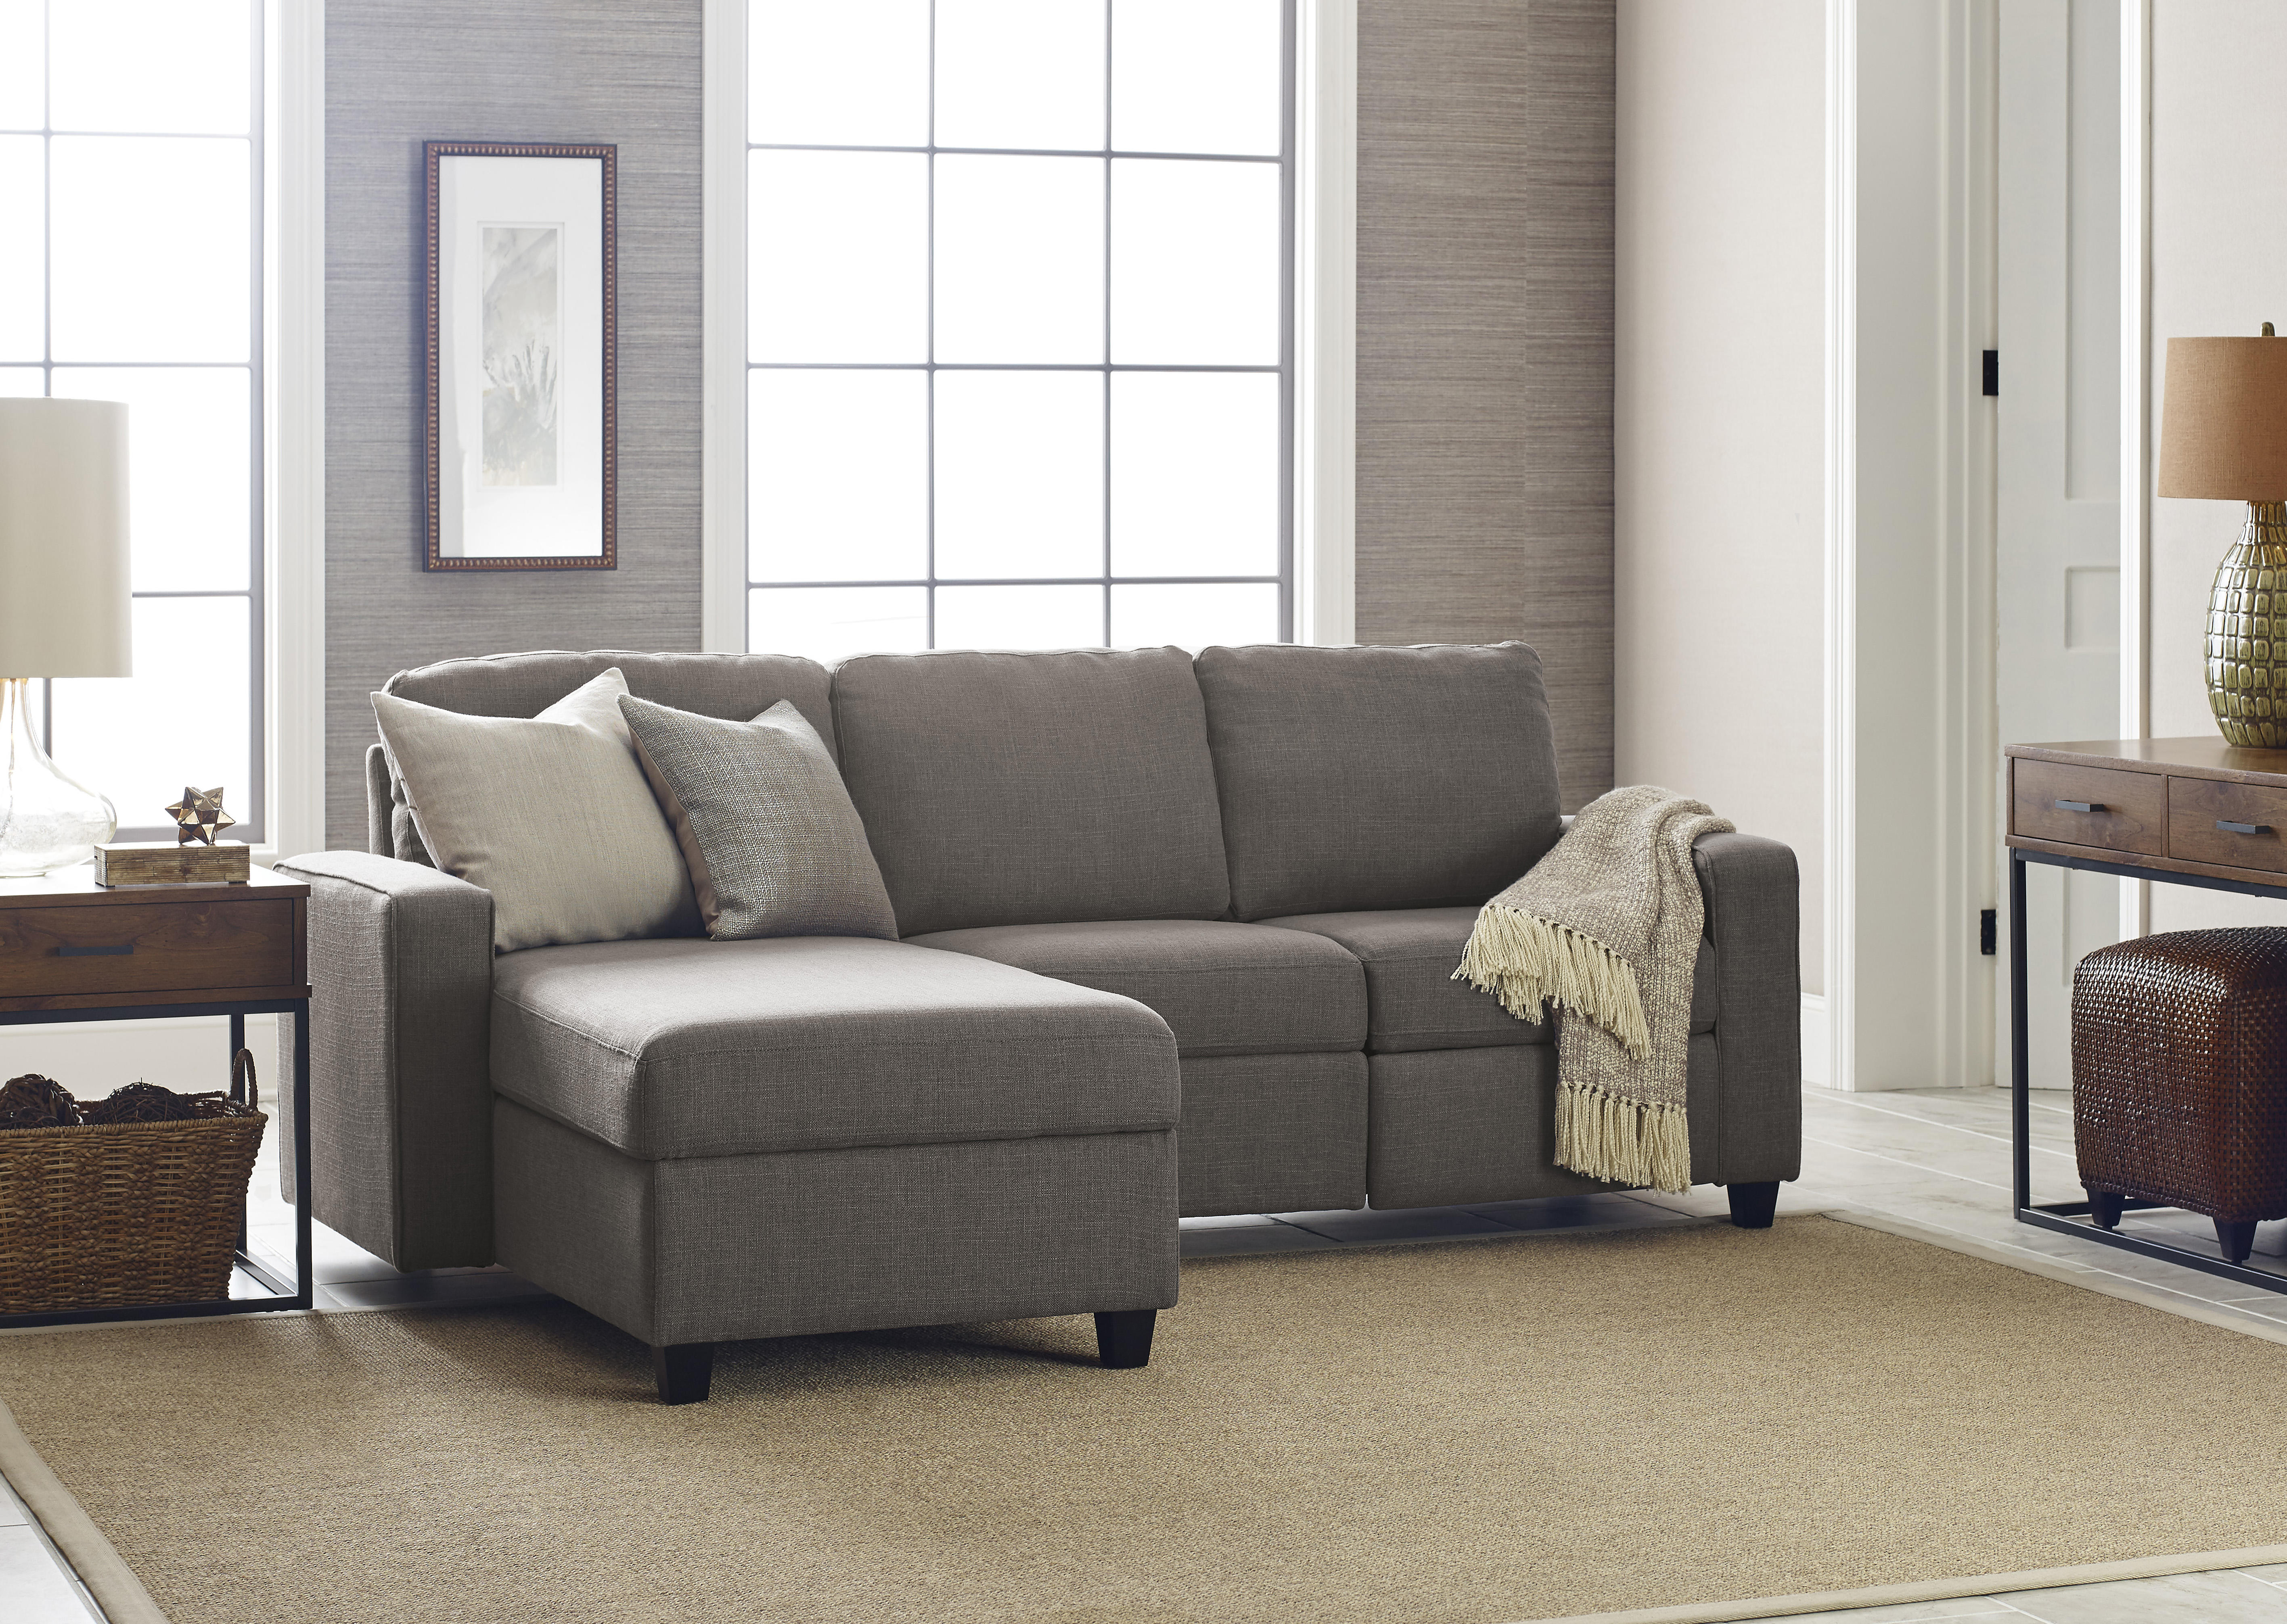 Serta Palisades Reclining Sectional with Left Storage Chaise - Gray - image 4 of 9